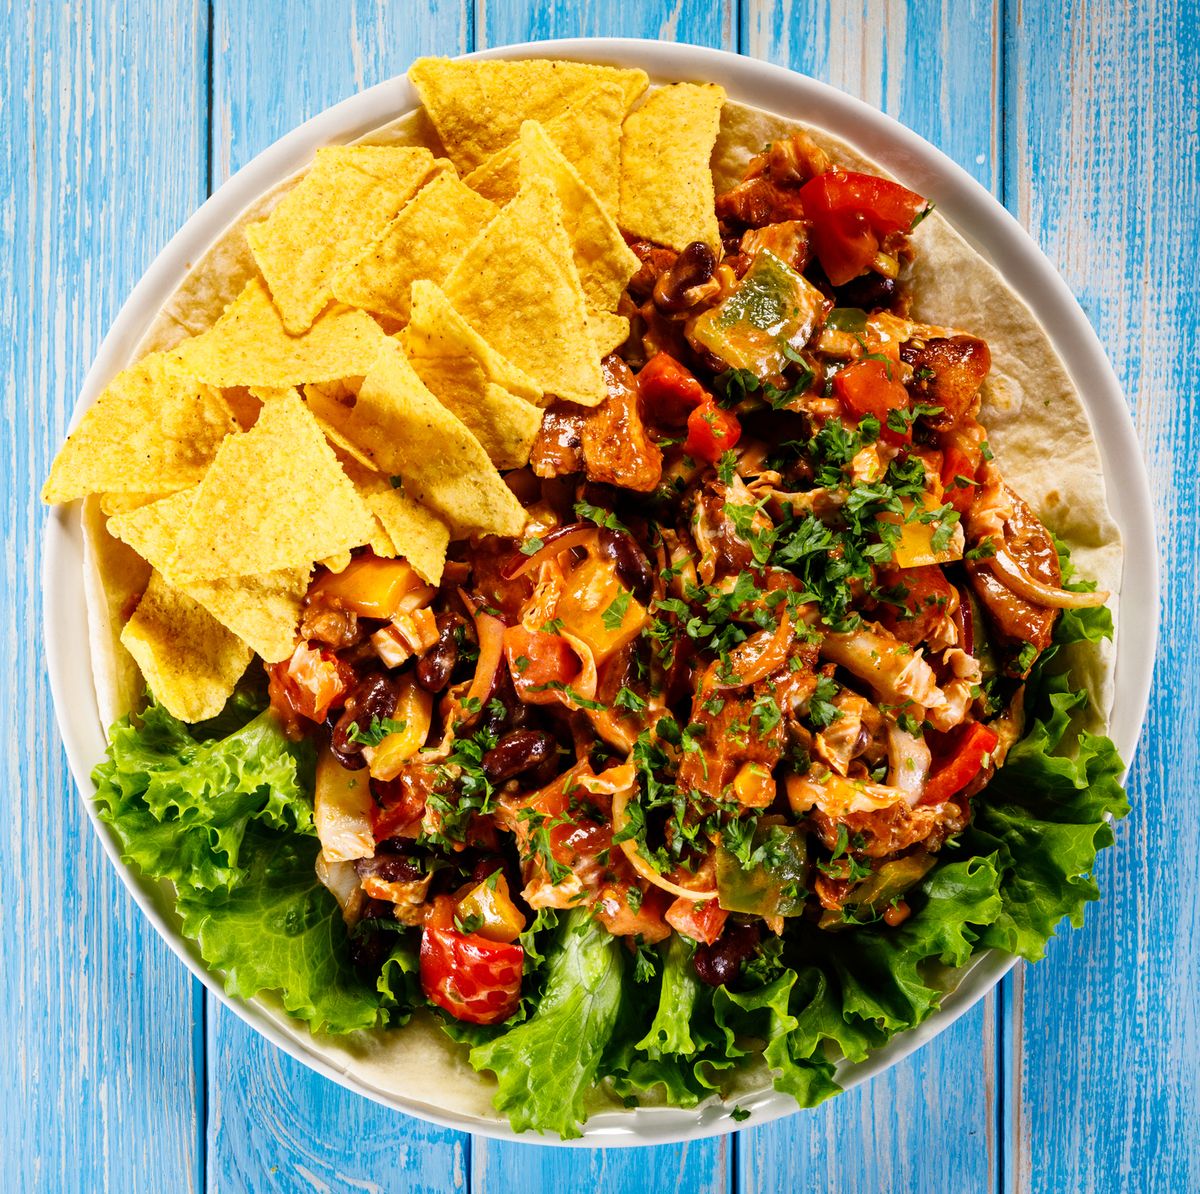 grilled chicken meat, nachos and vegetables on wooden background